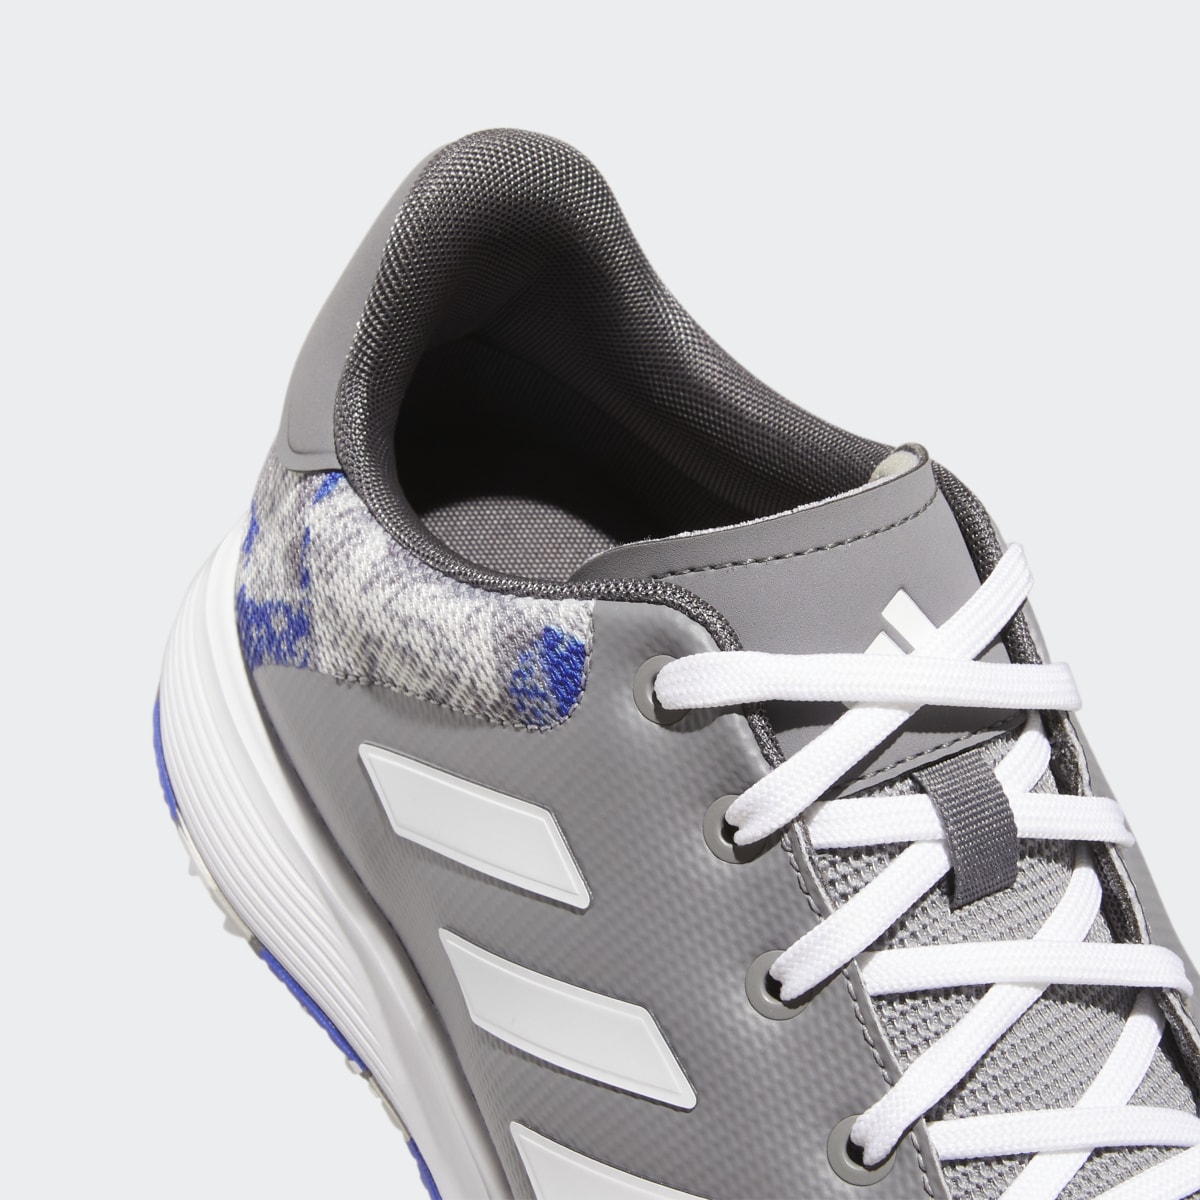 Adidas S2G Golf Shoes. 9